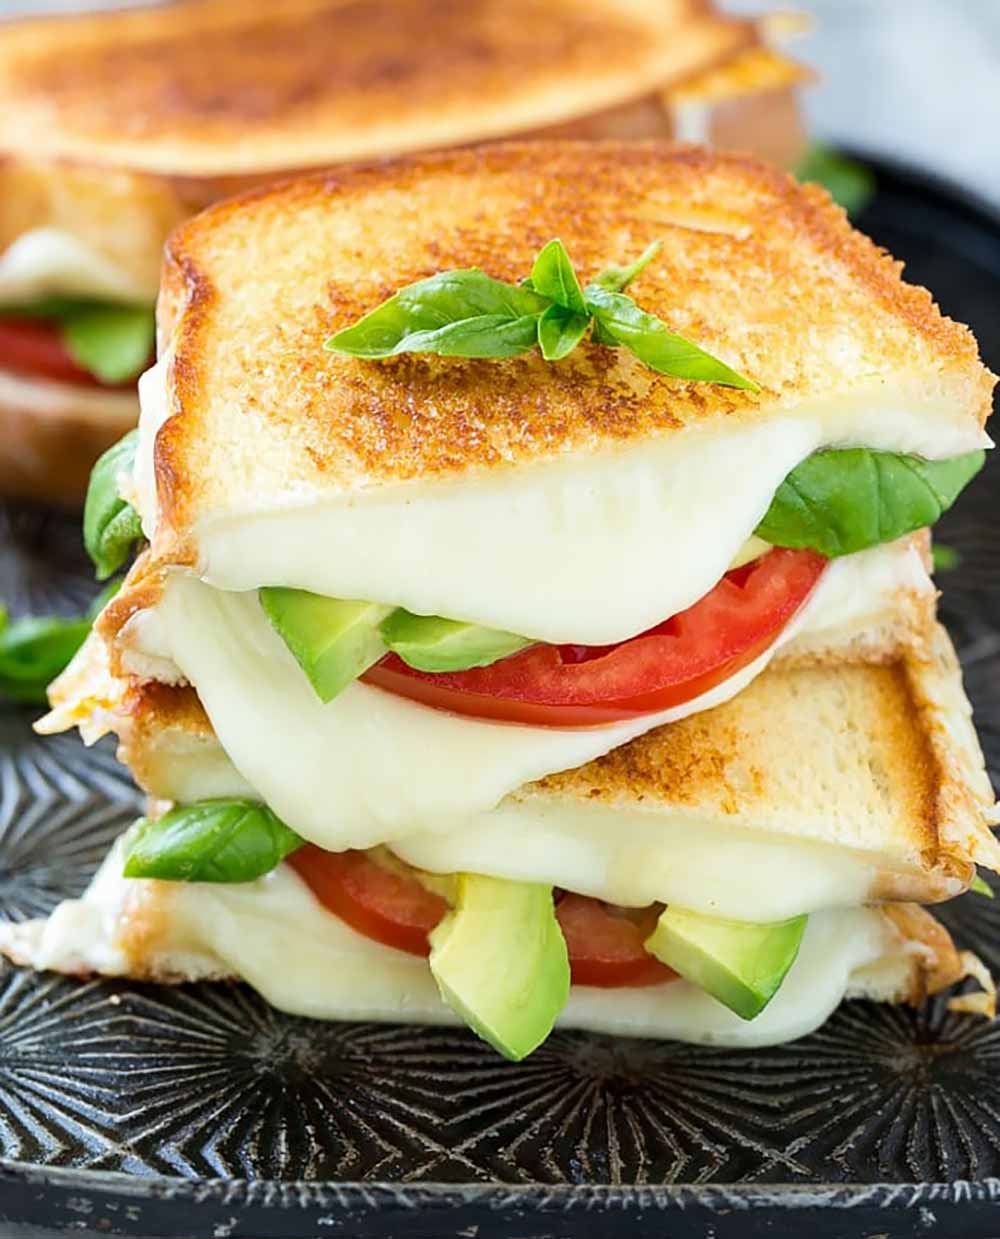 21 Mind-Blowing Grilled Cheese Sandwich Recipes: Grilled Caprese Sandwich